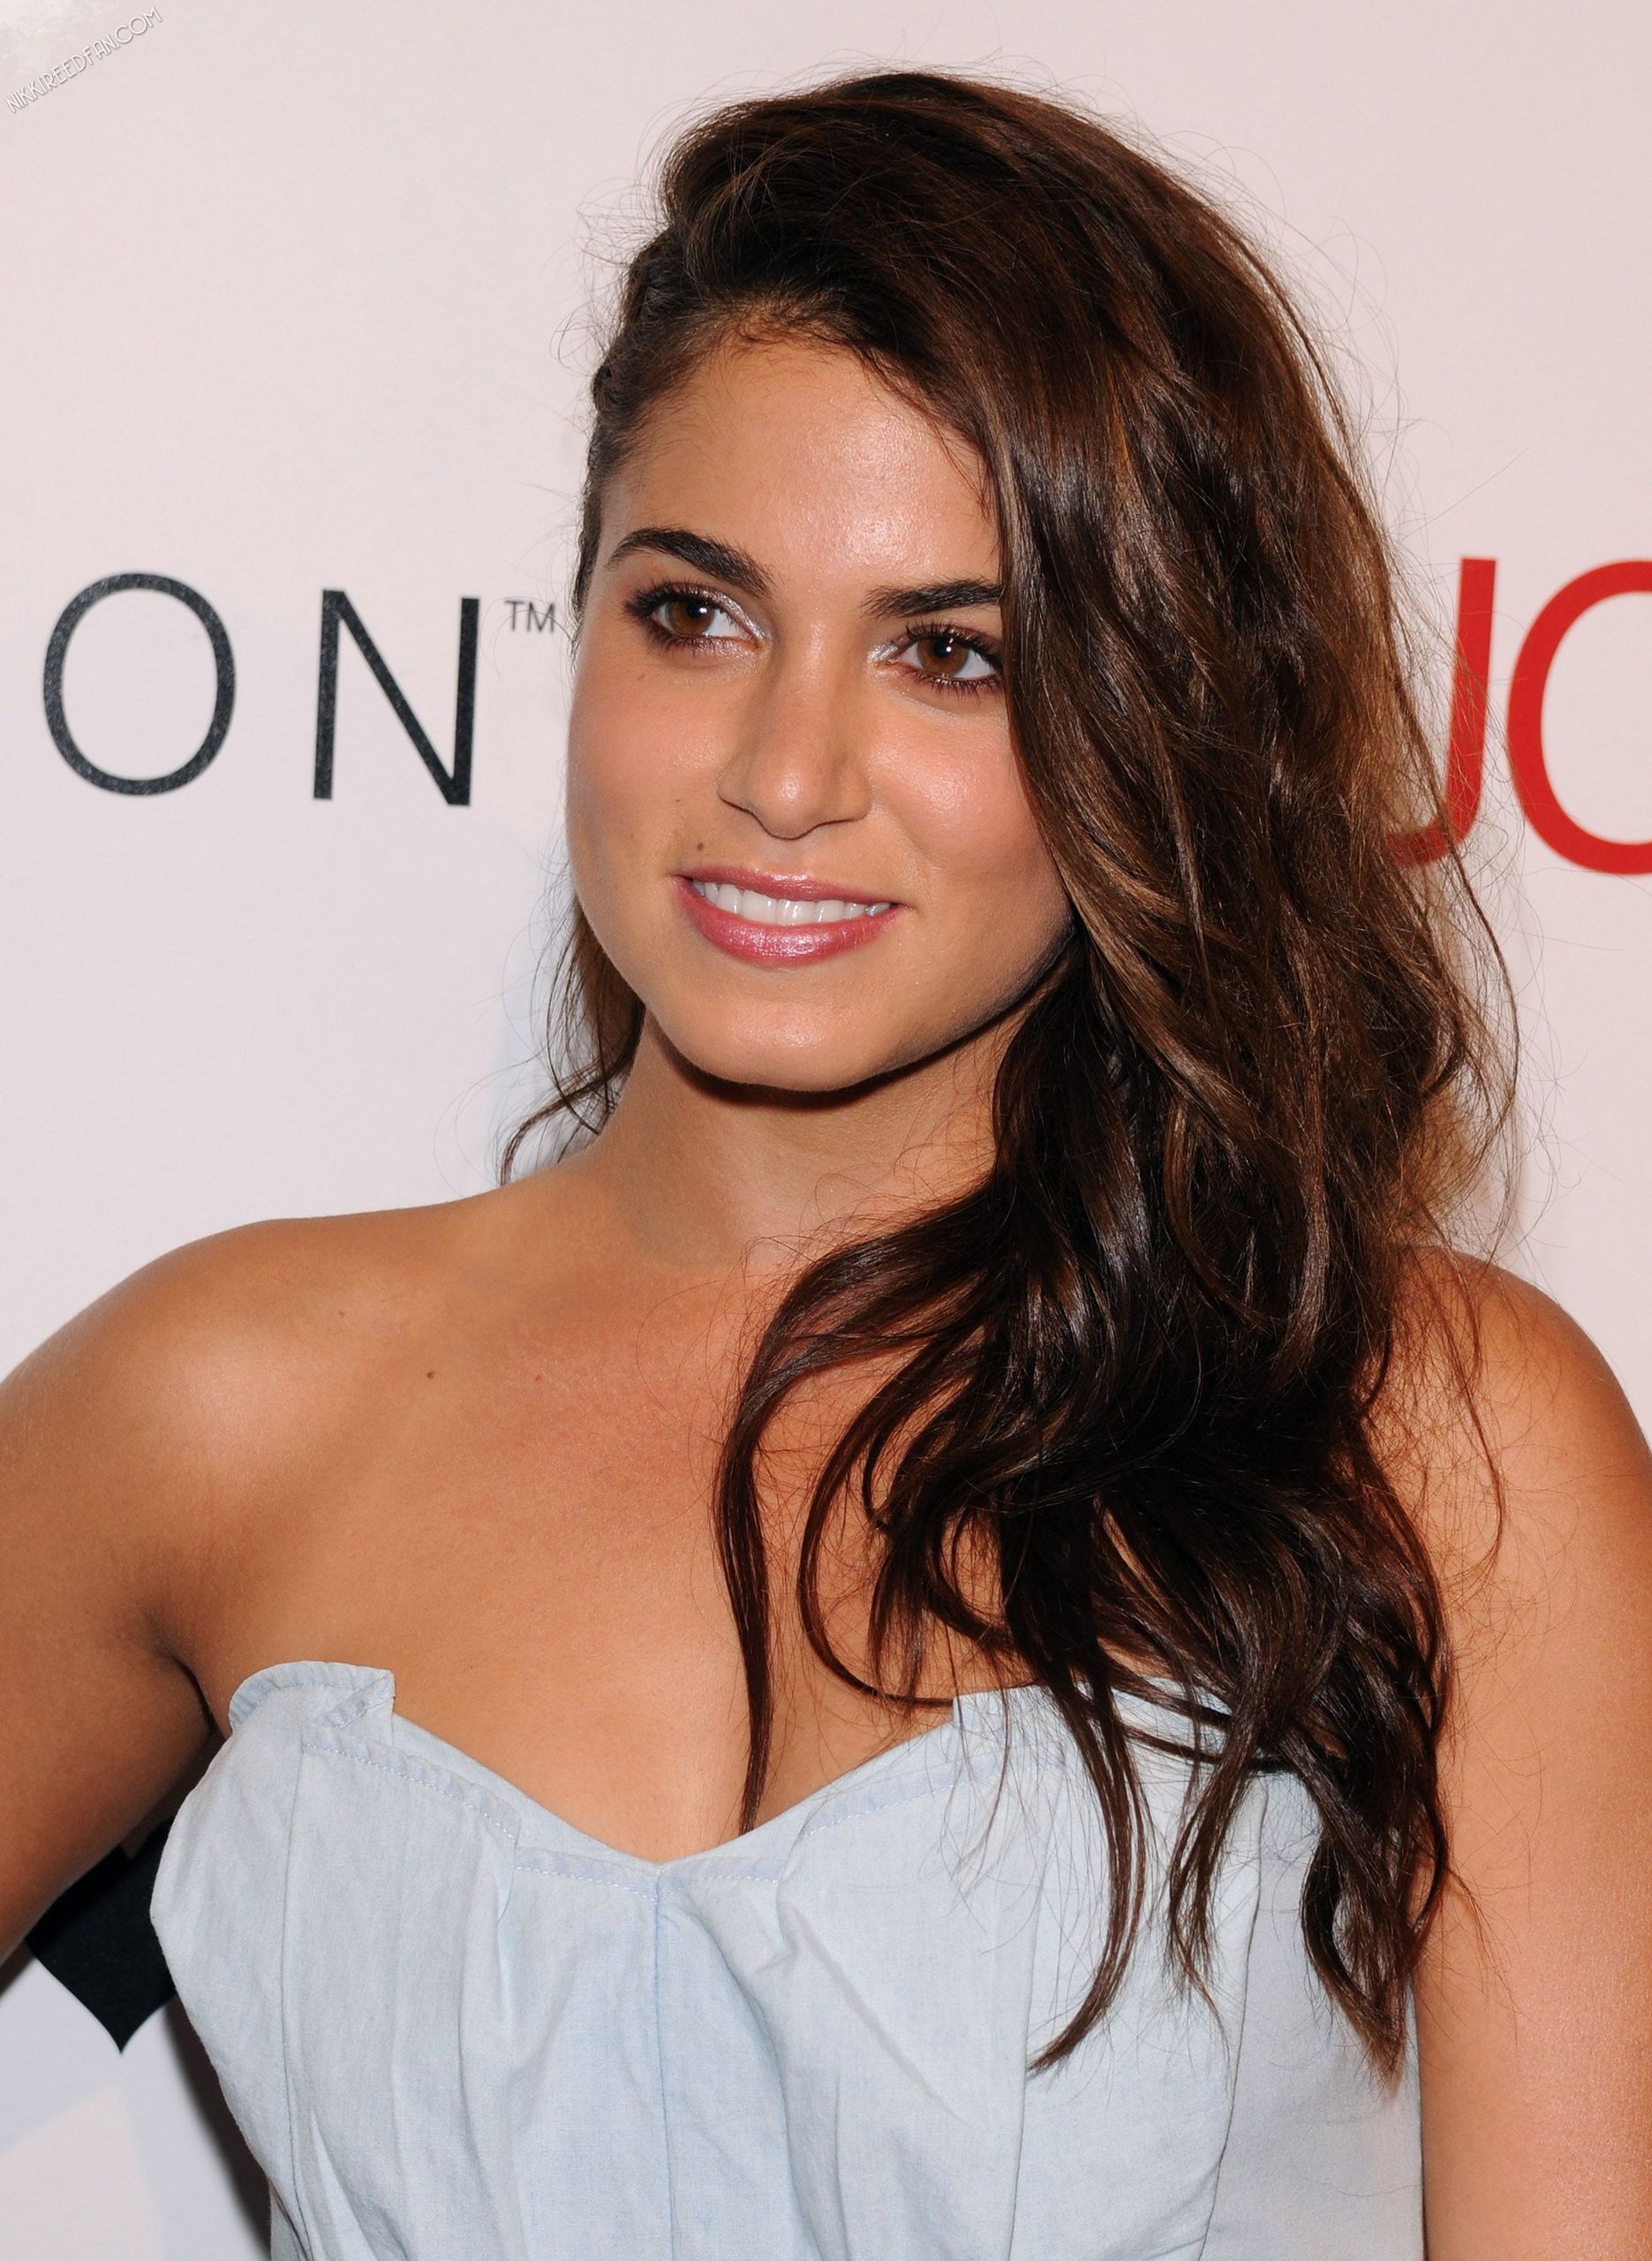 Photo of Nikki Reed for fans of Twilight Series. 